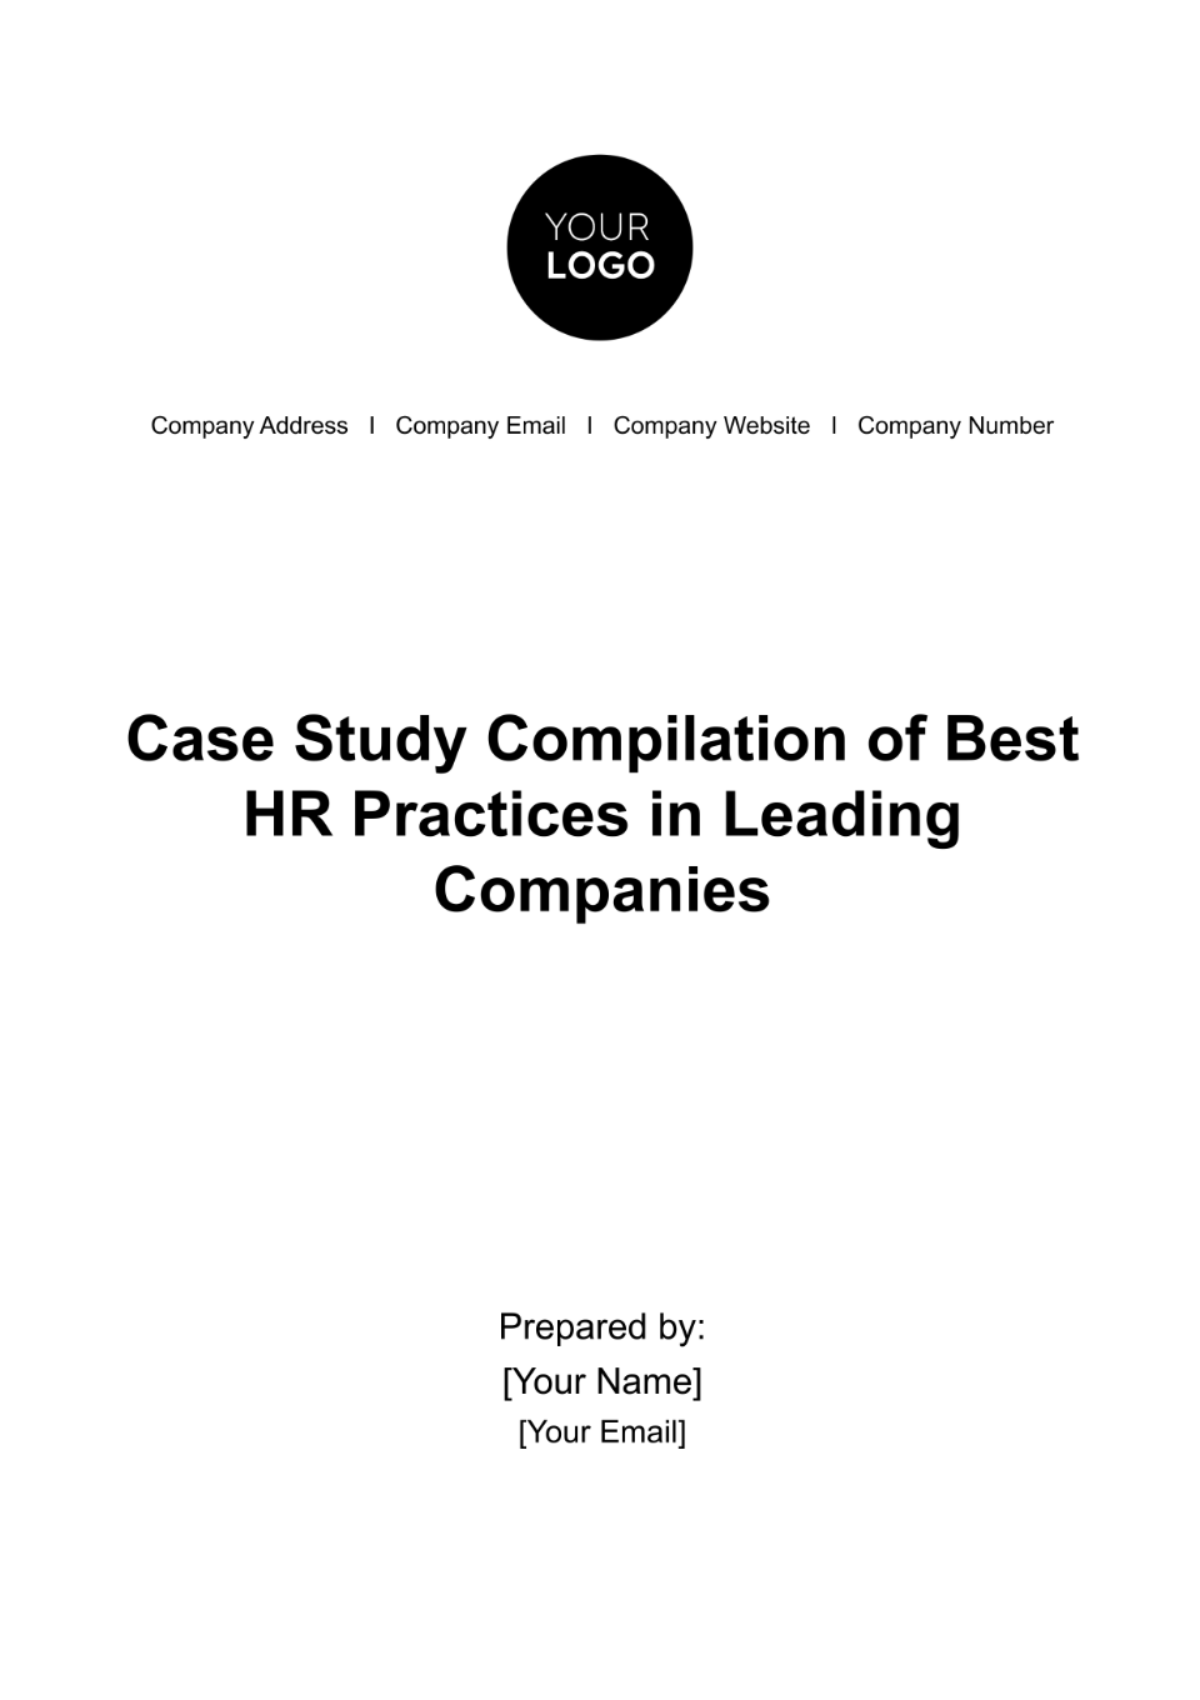 Case Study Compilation of Best HR Practices in Leading Companies Template